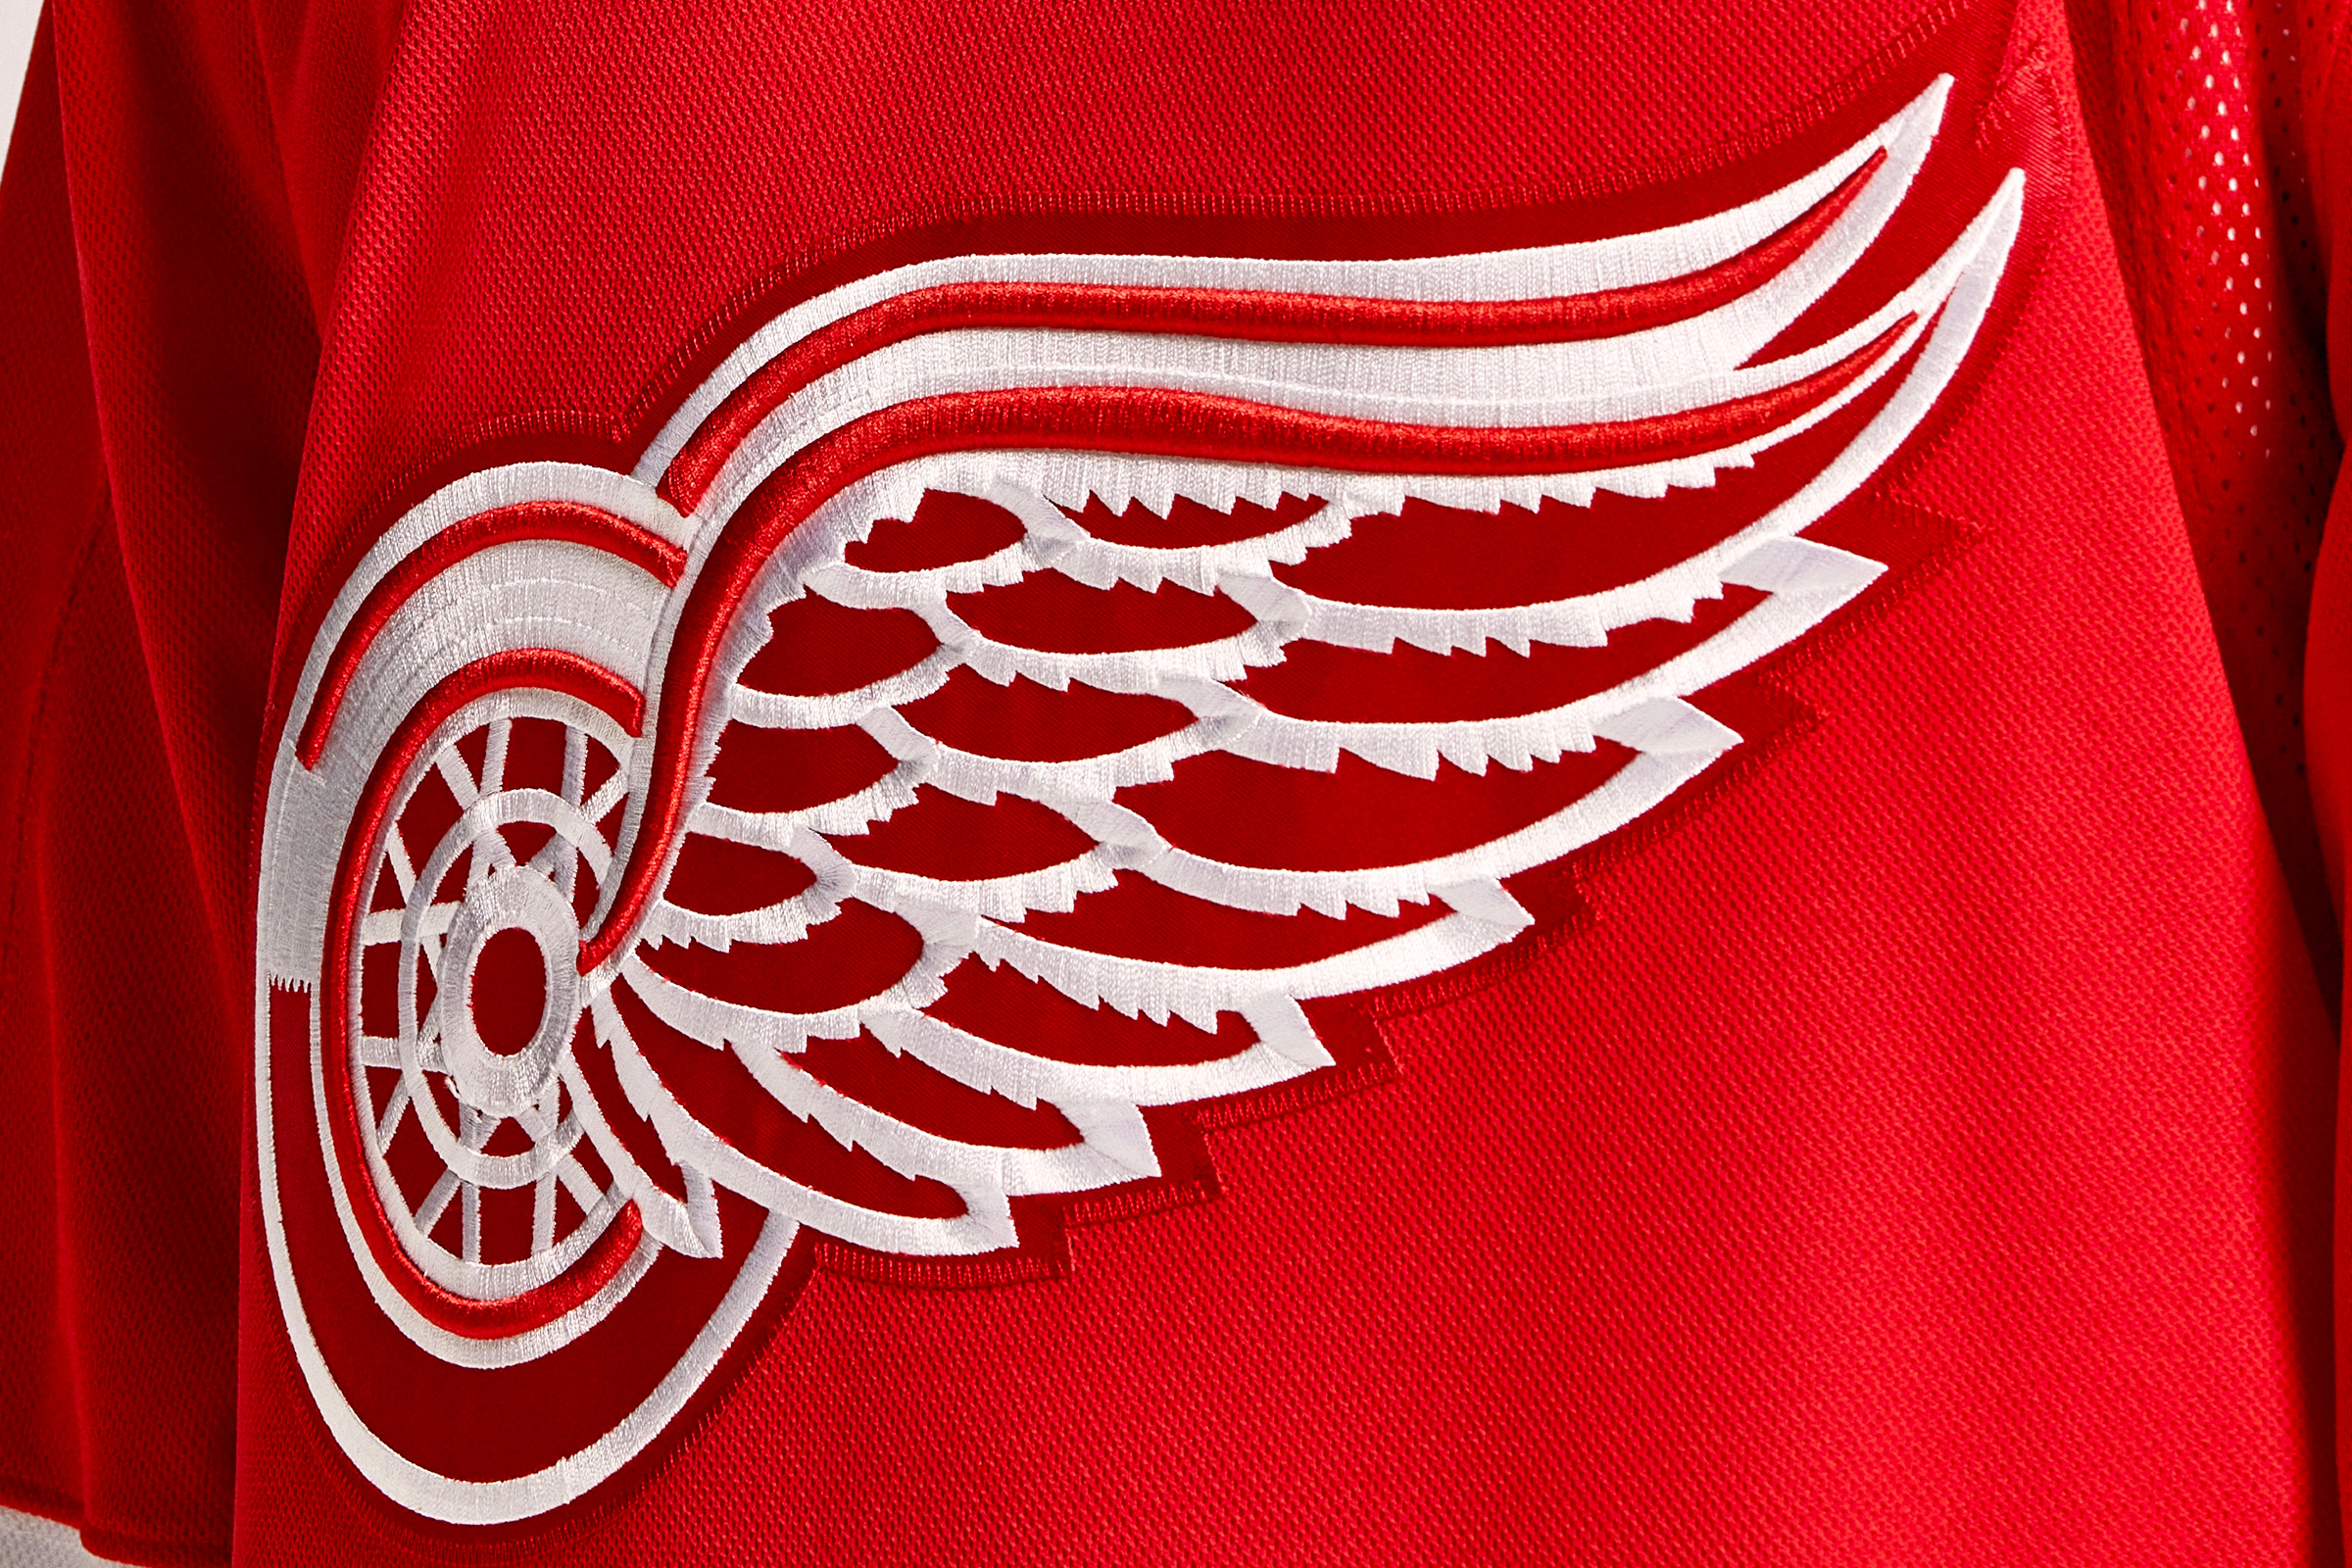 The Red Wings' jersey.